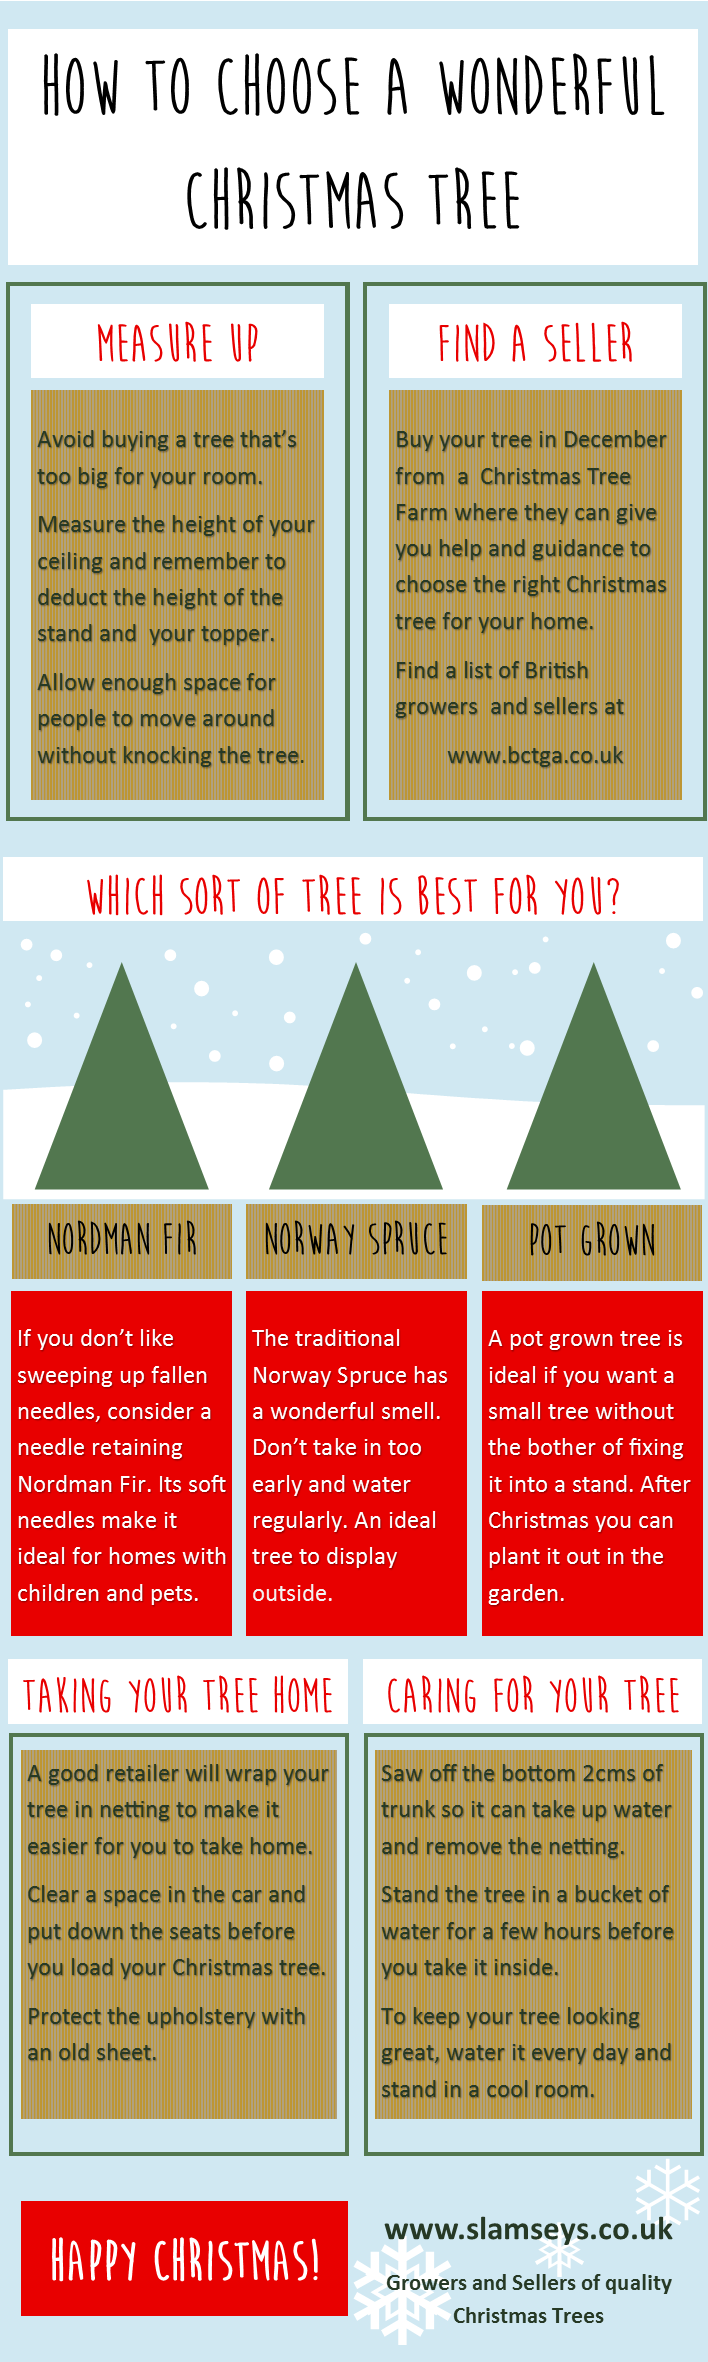 How to choose a wonderful Christmas Tree infographic